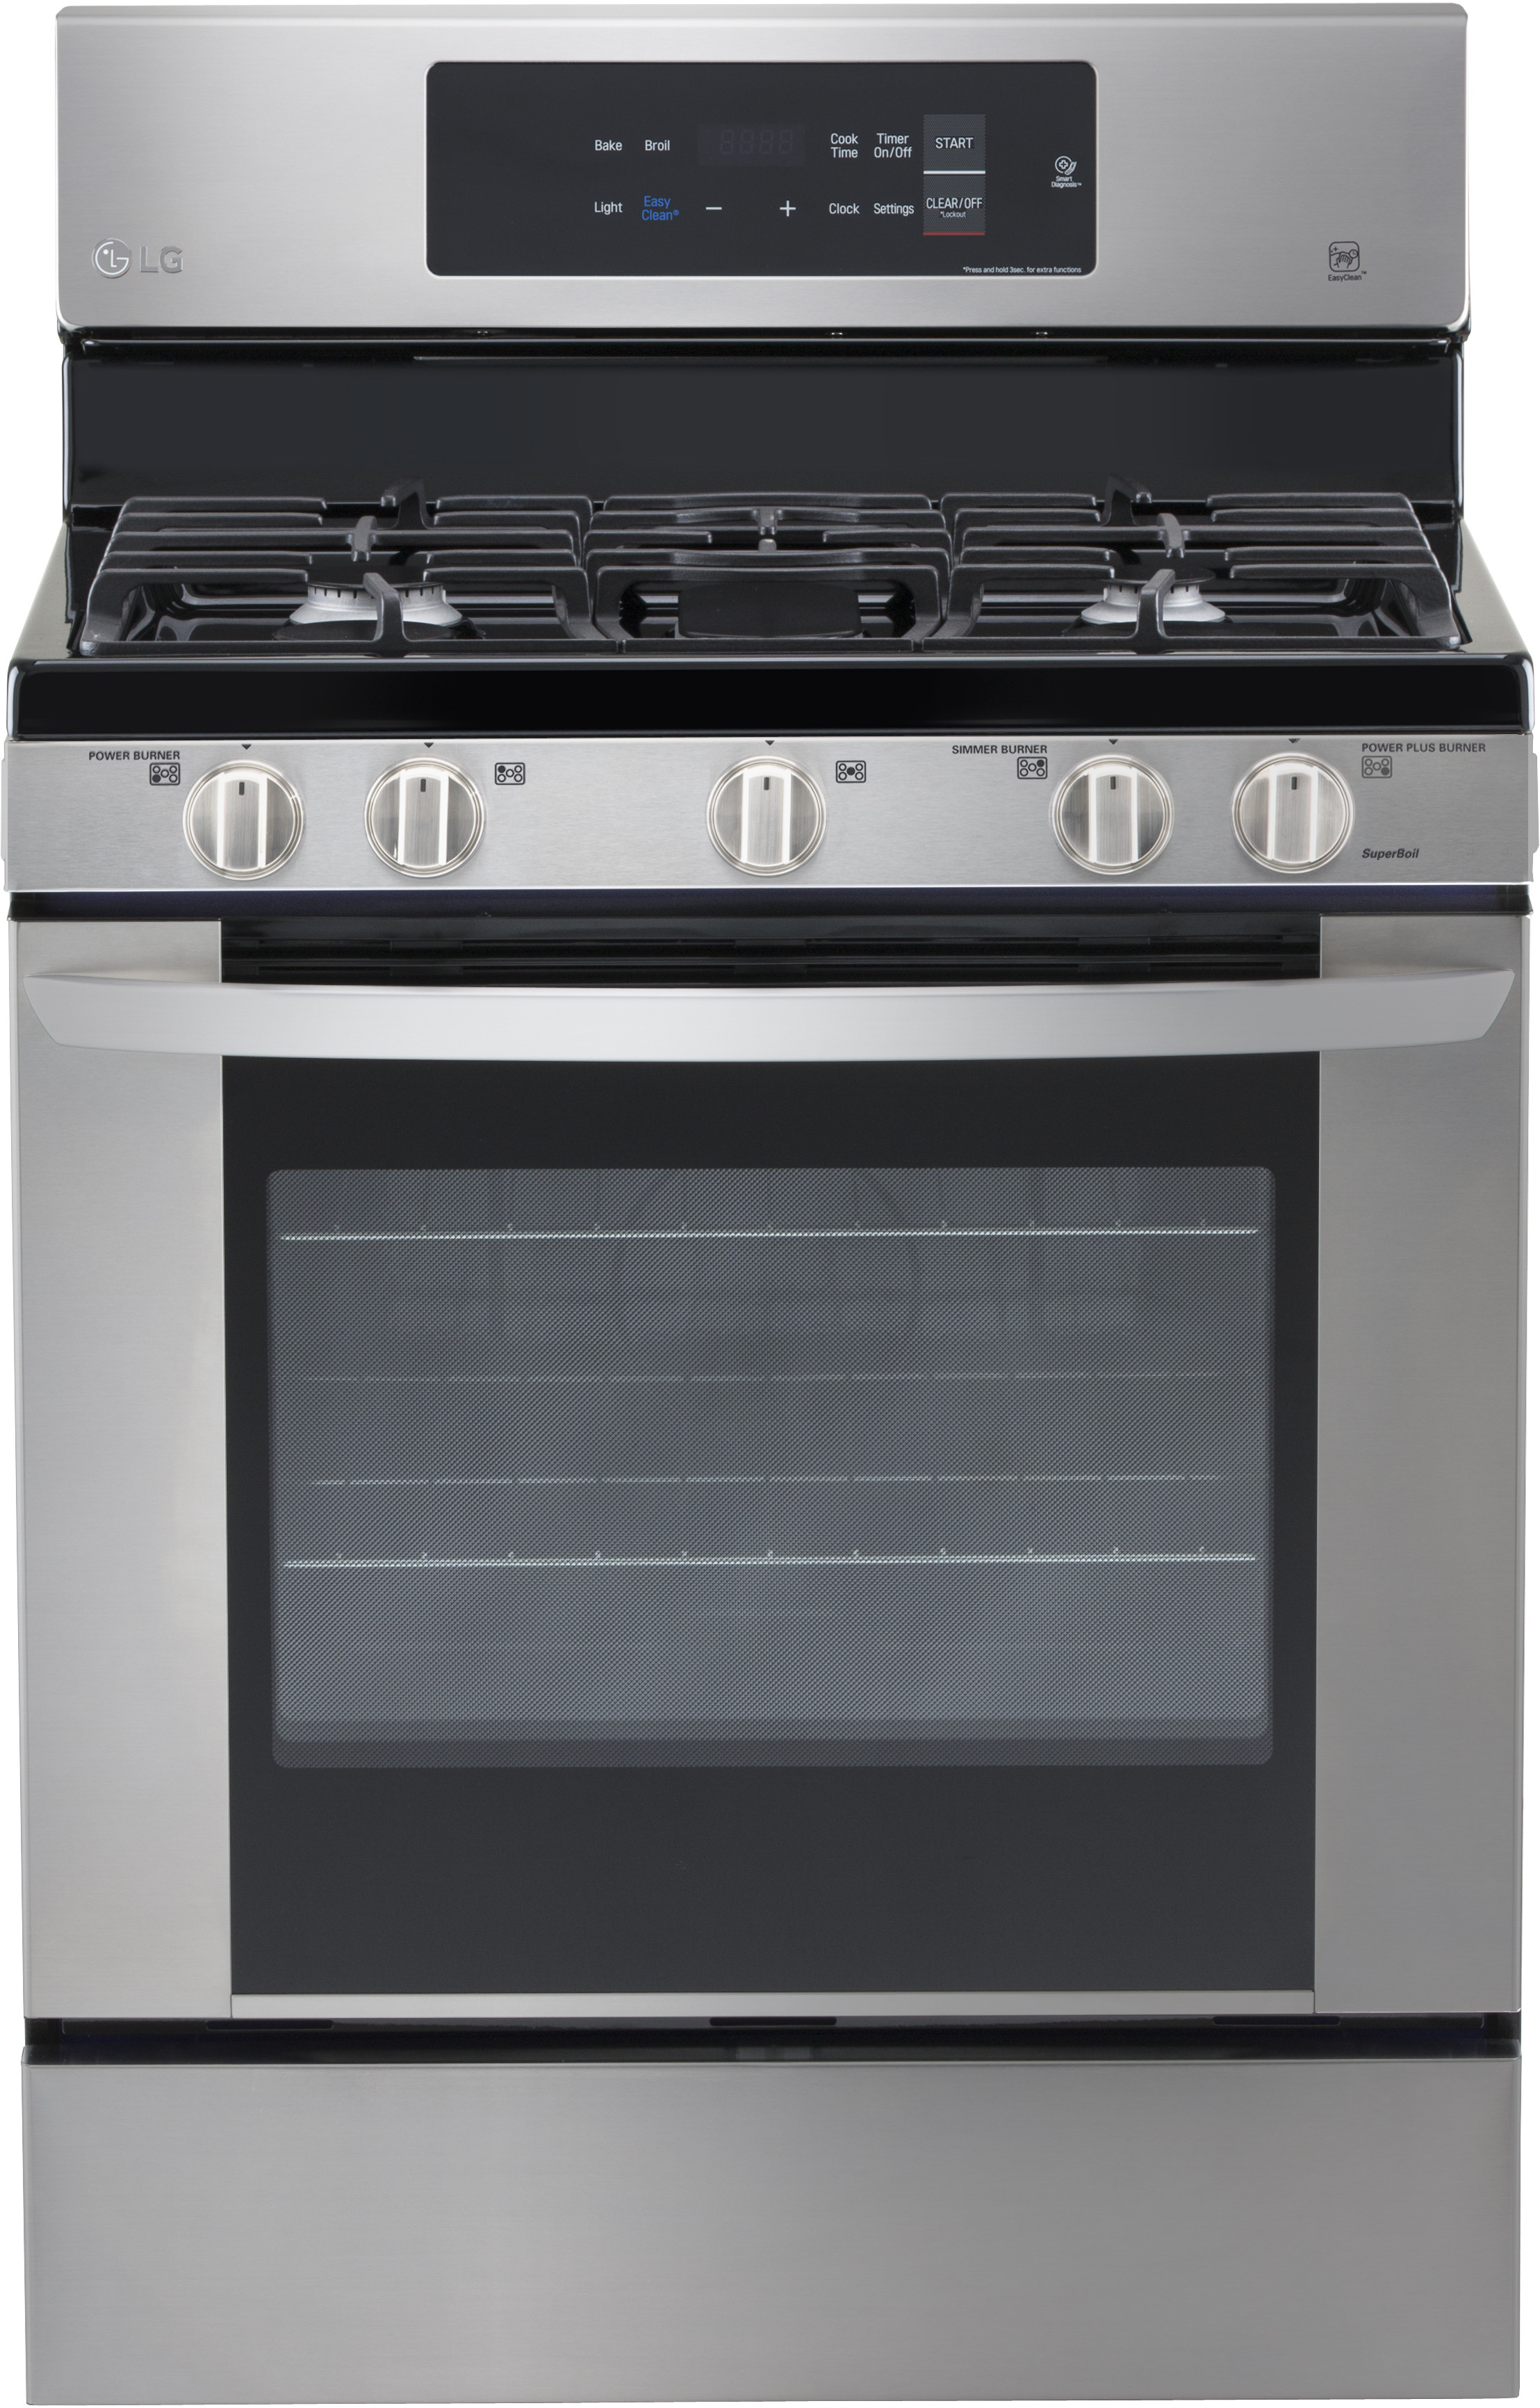 LG LRG3061ST 30 Inch Gas Range with 5 Sealed Burners, 5.4 cu. ft. Oven, 4 Cooking Modes, Storage